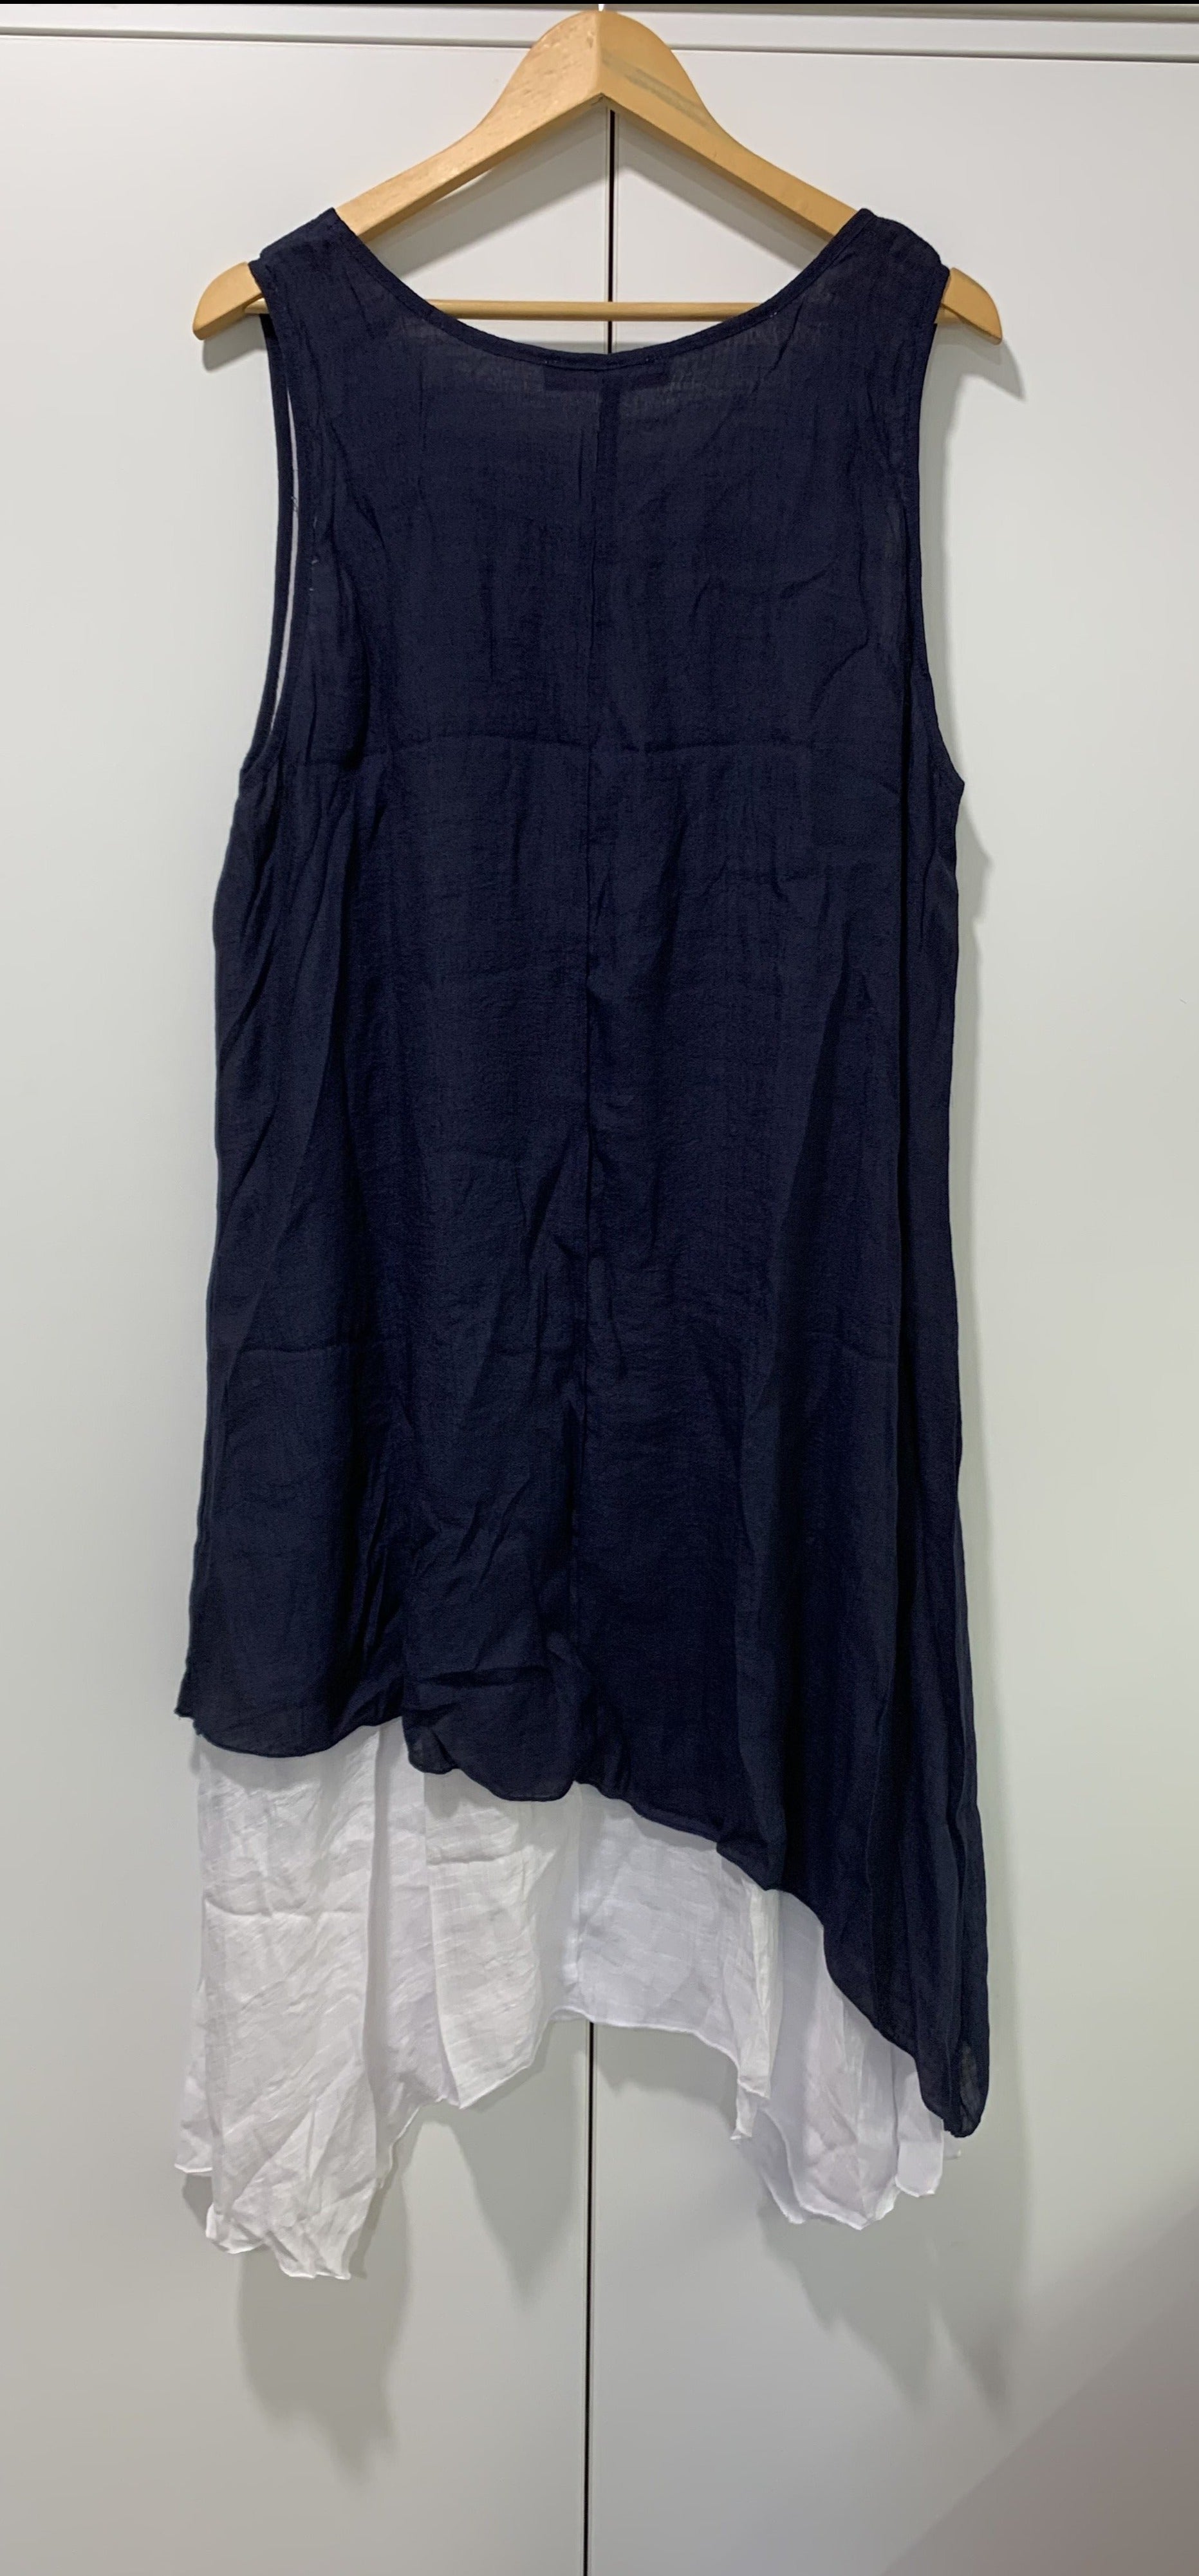 Contrast Layered Singlet Dress in Navy Blue Flowing and Chic - Mix & Match